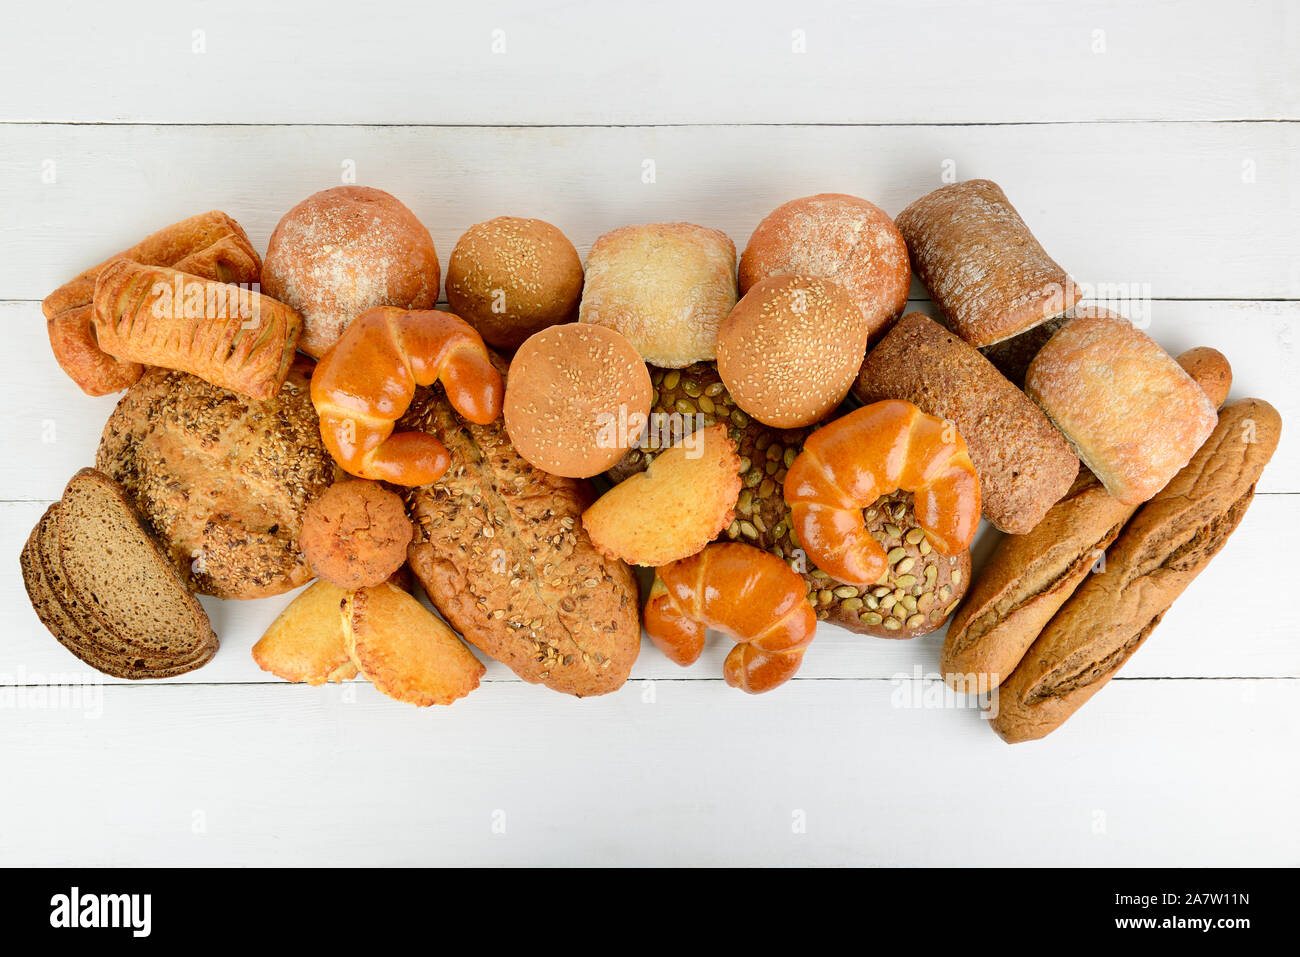 Bread, buns, croissants and other baked goods on wooden table. Top view. Copy space Stock Photo